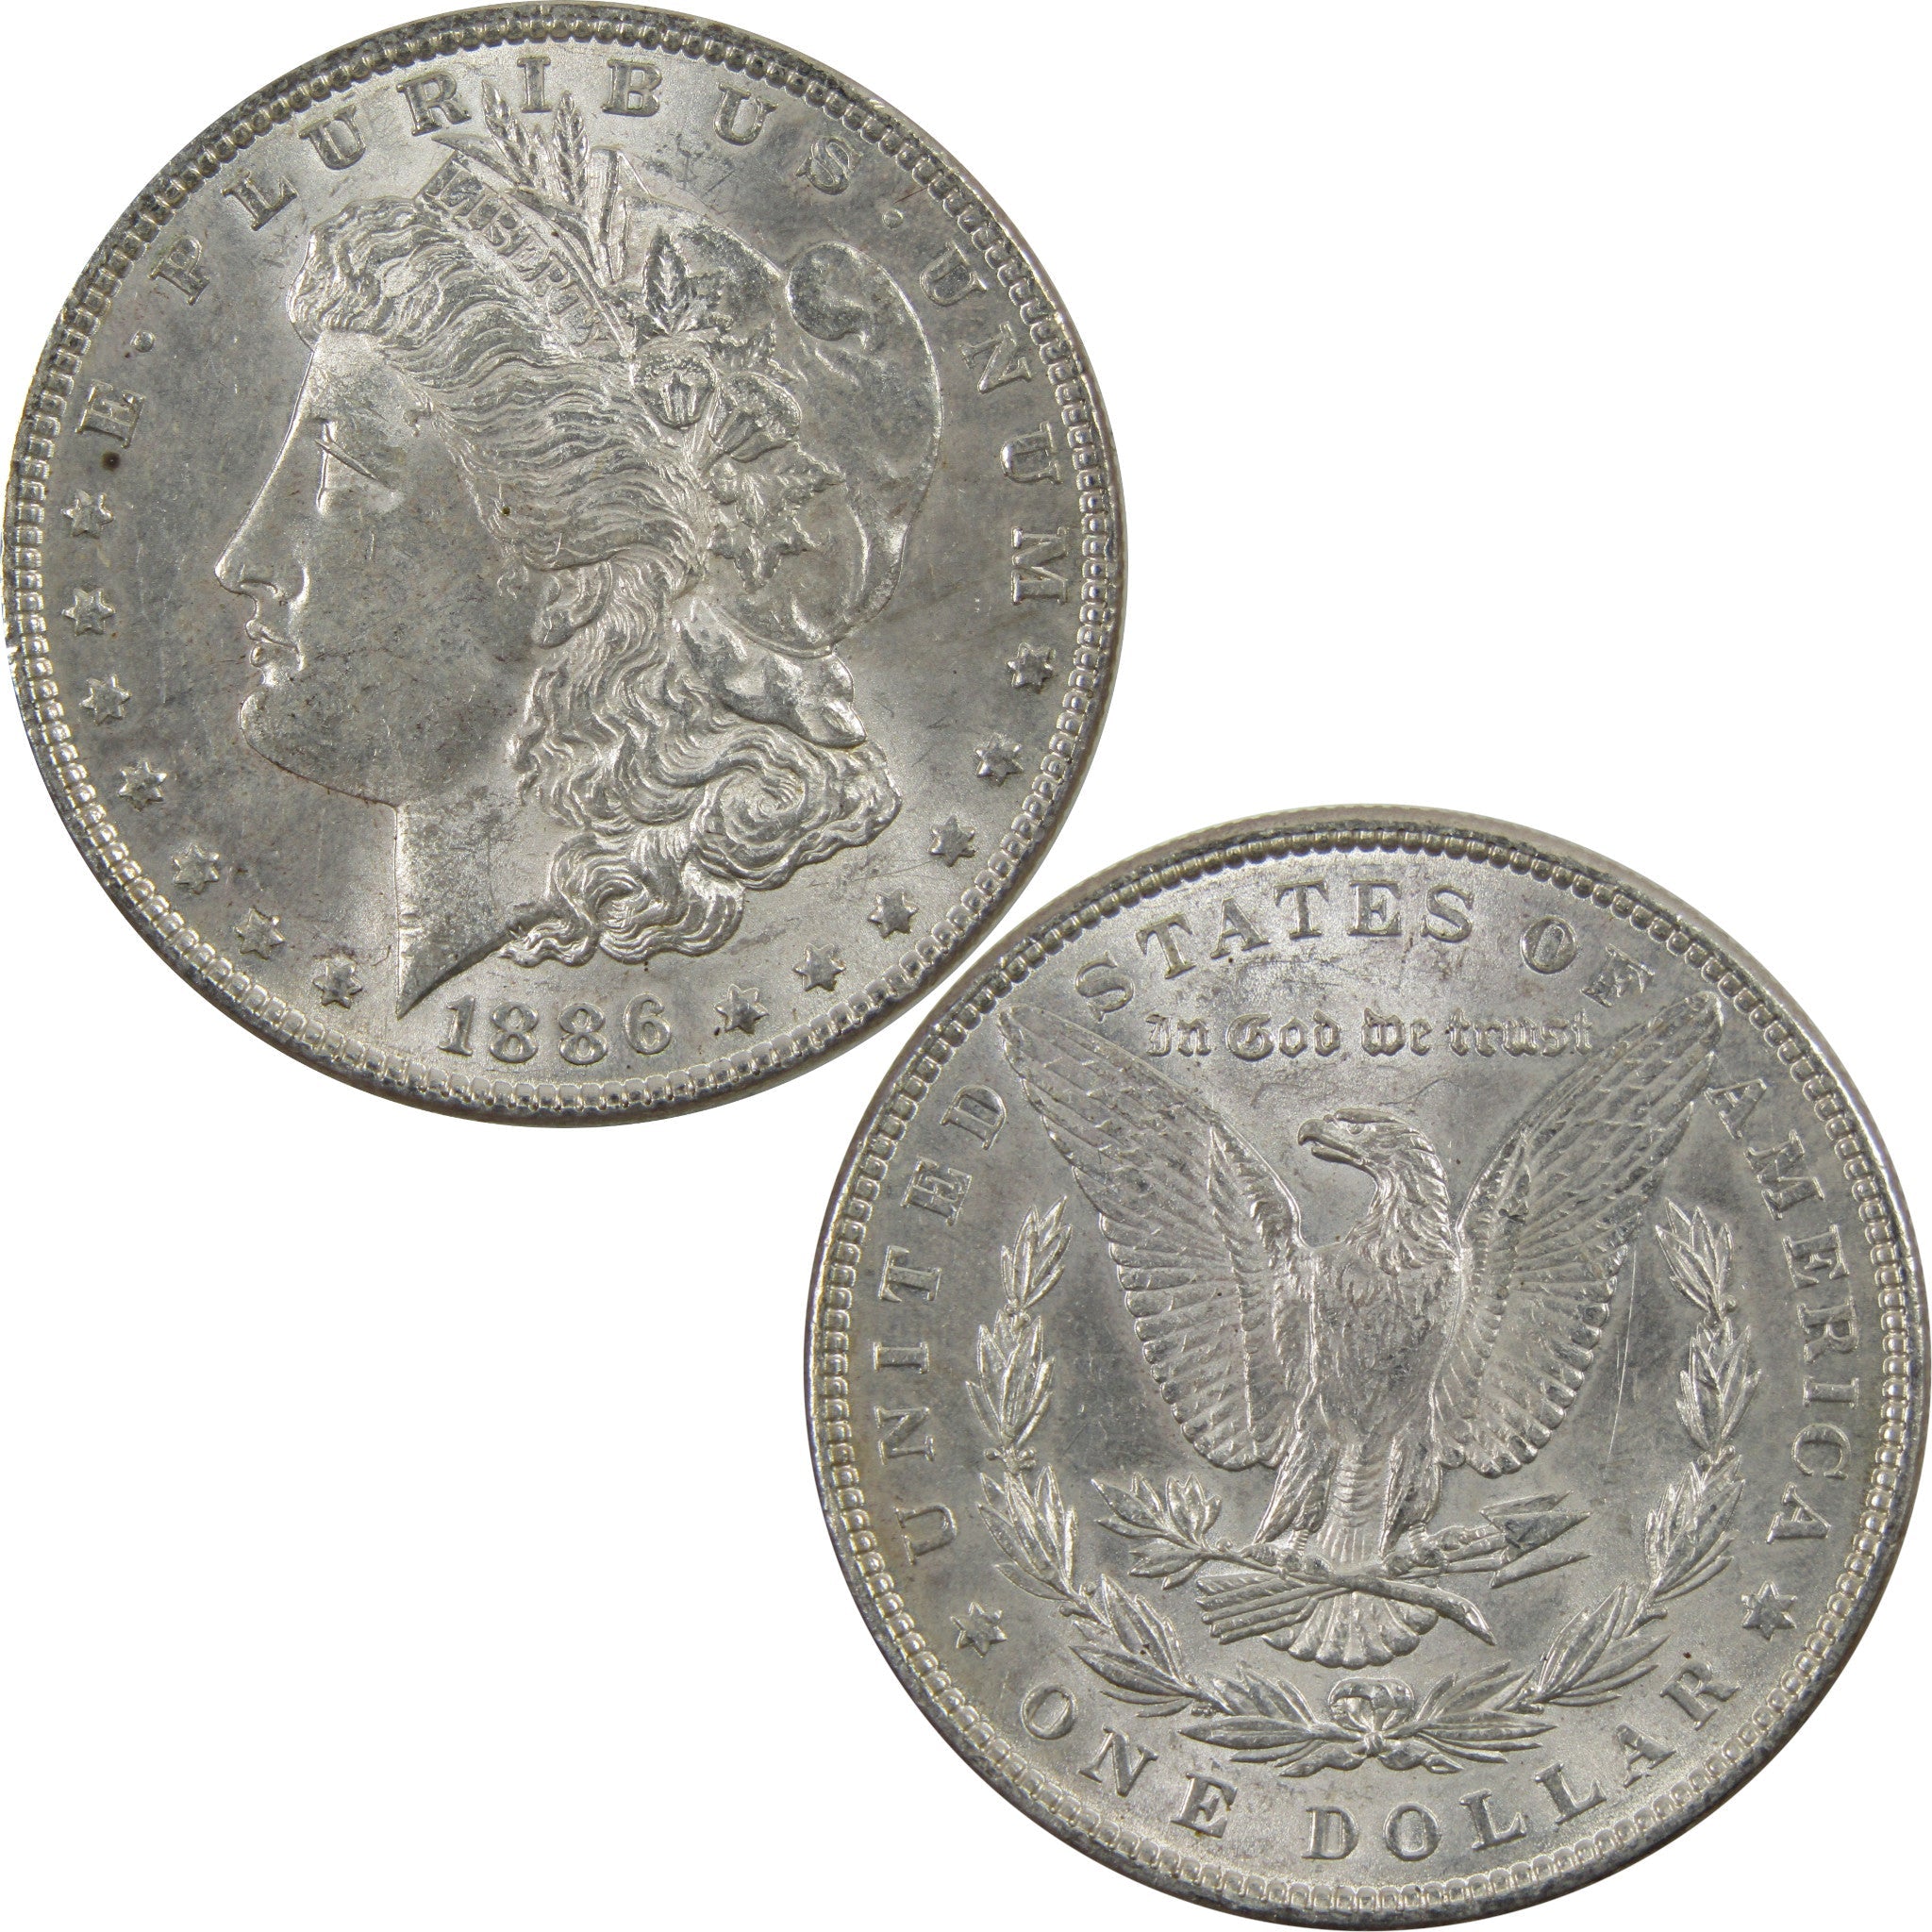 1886 Morgan Dollar AU About Uncirculated 90% Silver $1 Coin SKU:I5467 - Morgan coin - Morgan silver dollar - Morgan silver dollar for sale - Profile Coins &amp; Collectibles